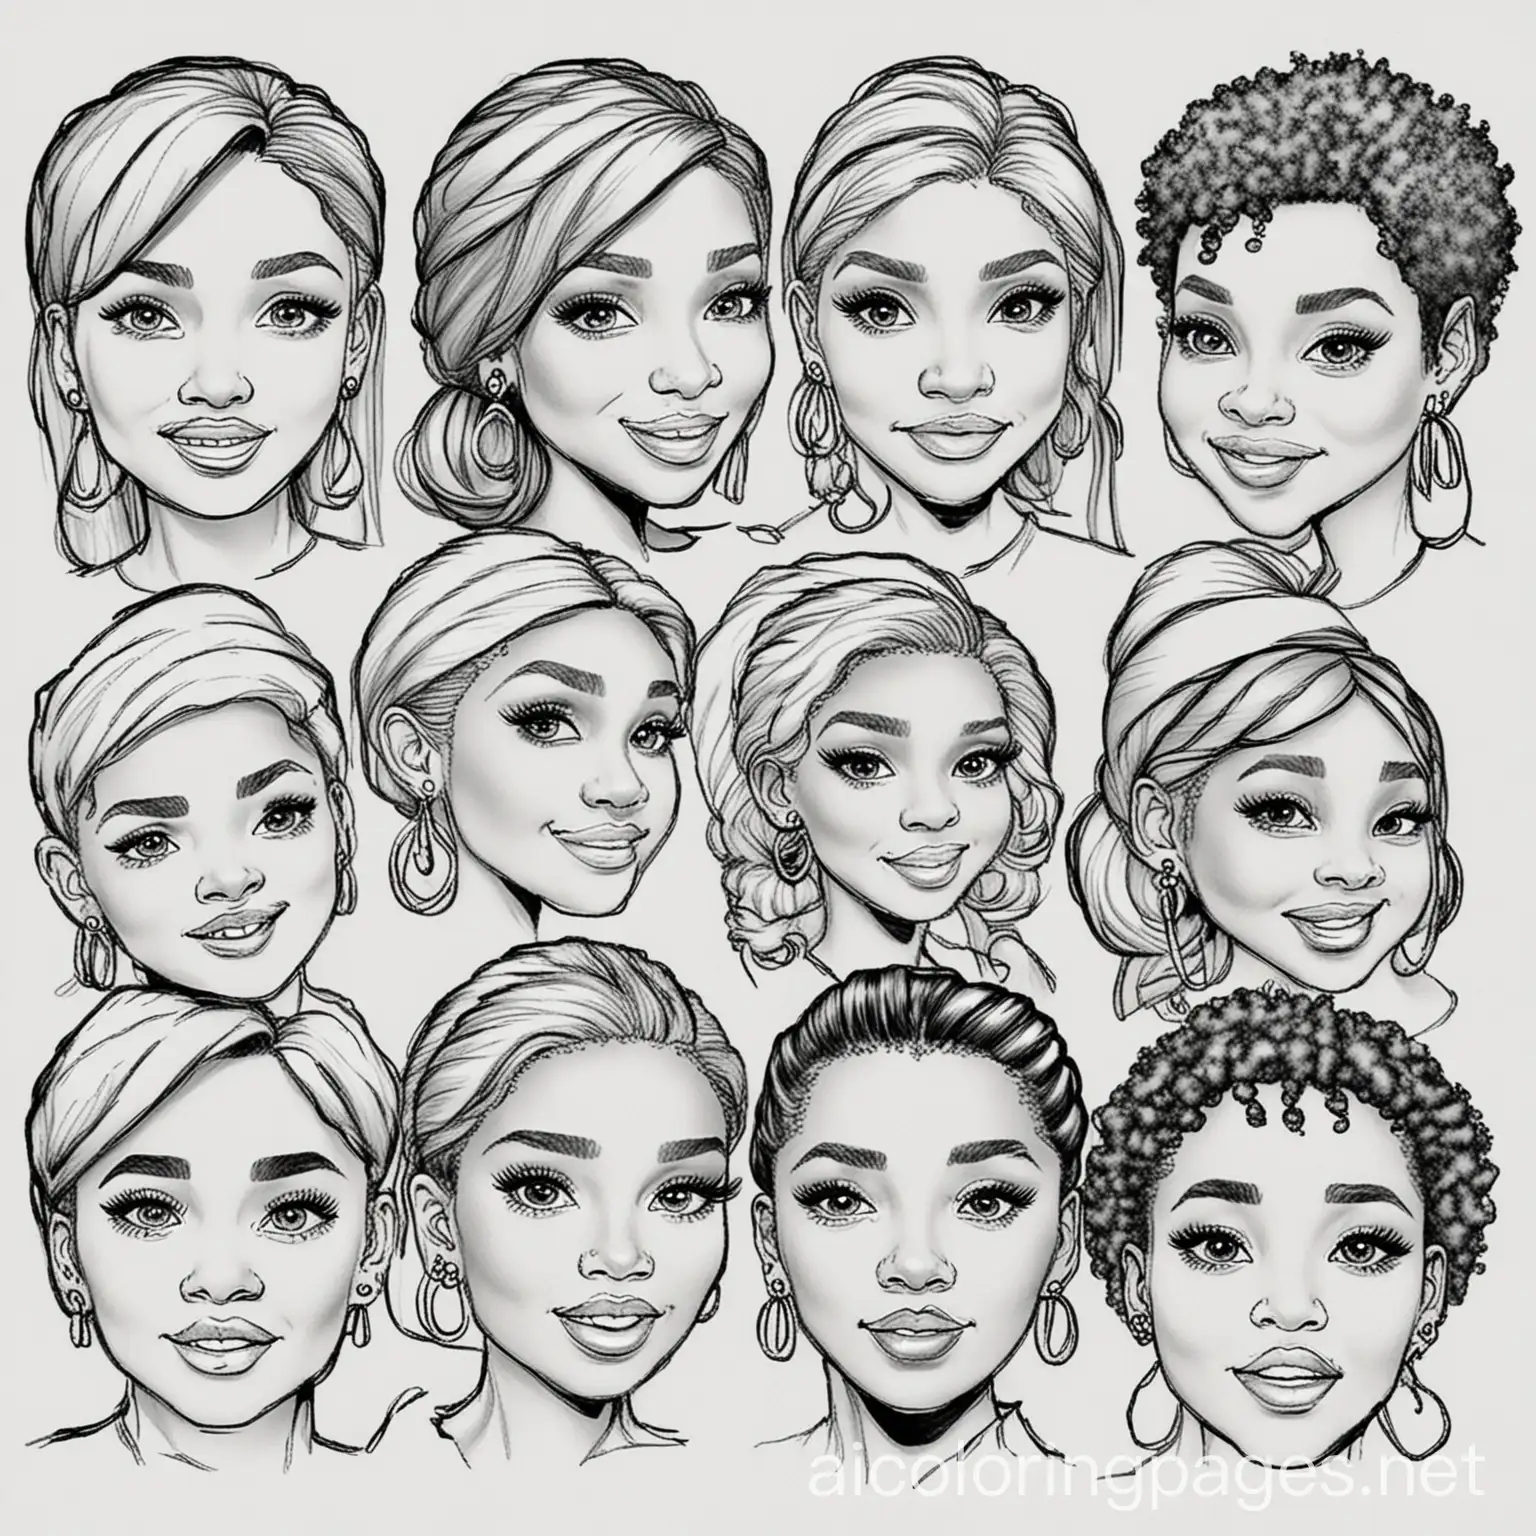 Black Celebrites face , Coloring Page, black and white, line art, white background, Simplicity, Ample White Space. The background of the coloring page is plain white to make it easy for young children to color within the lines. The outlines of all the subjects are easy to distinguish, making it simple for kids to color without too much difficulty